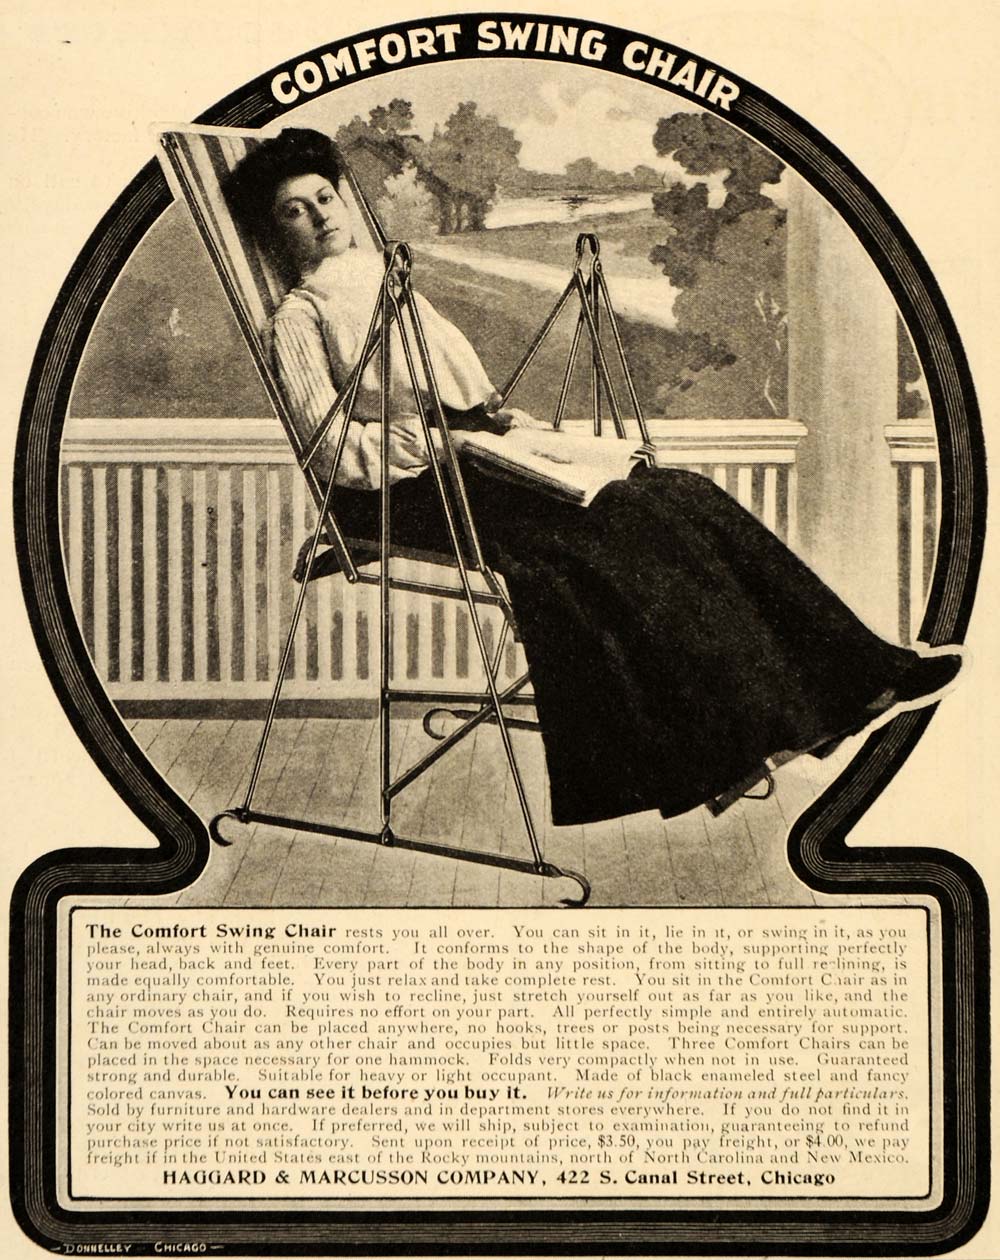 1904 Vintage Ad Haggard Marcusson Porch Swing Chair 422 S Canal St Chicago OD1